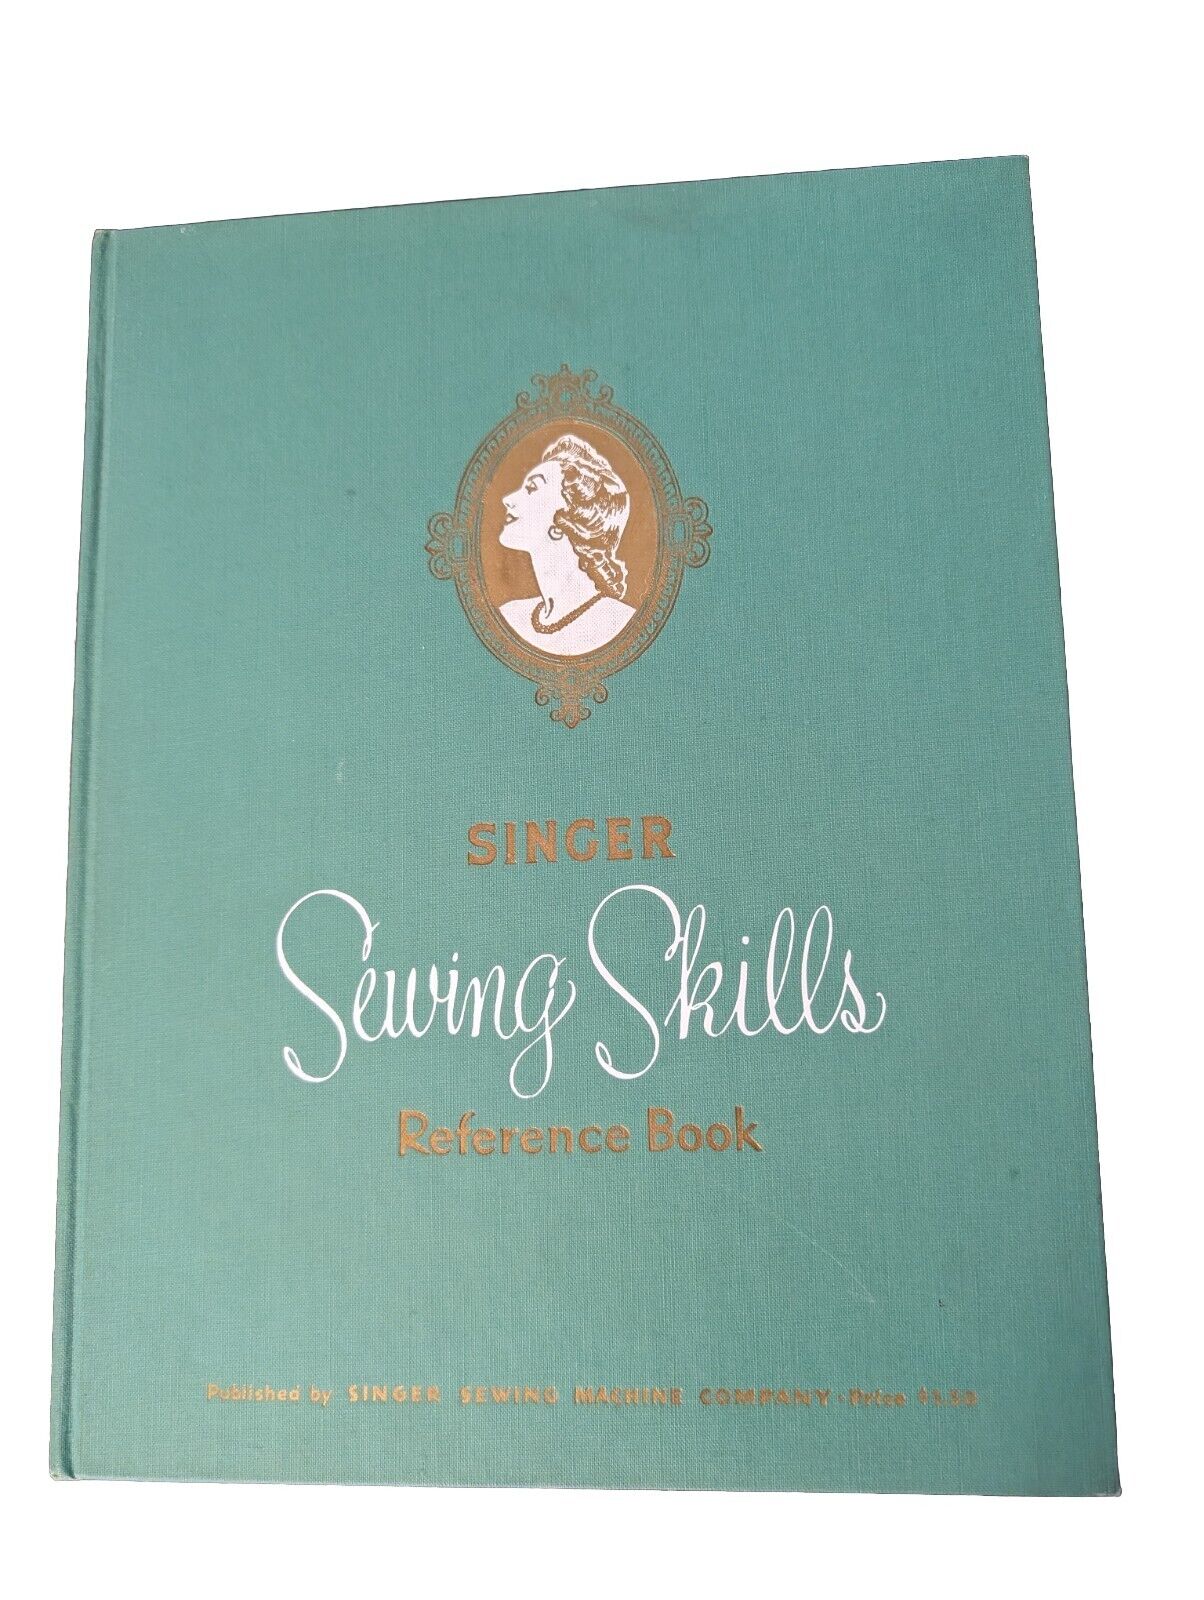 Singer Sewing Machine Skills Reference Book - Hardcover - Green Retro - 1954